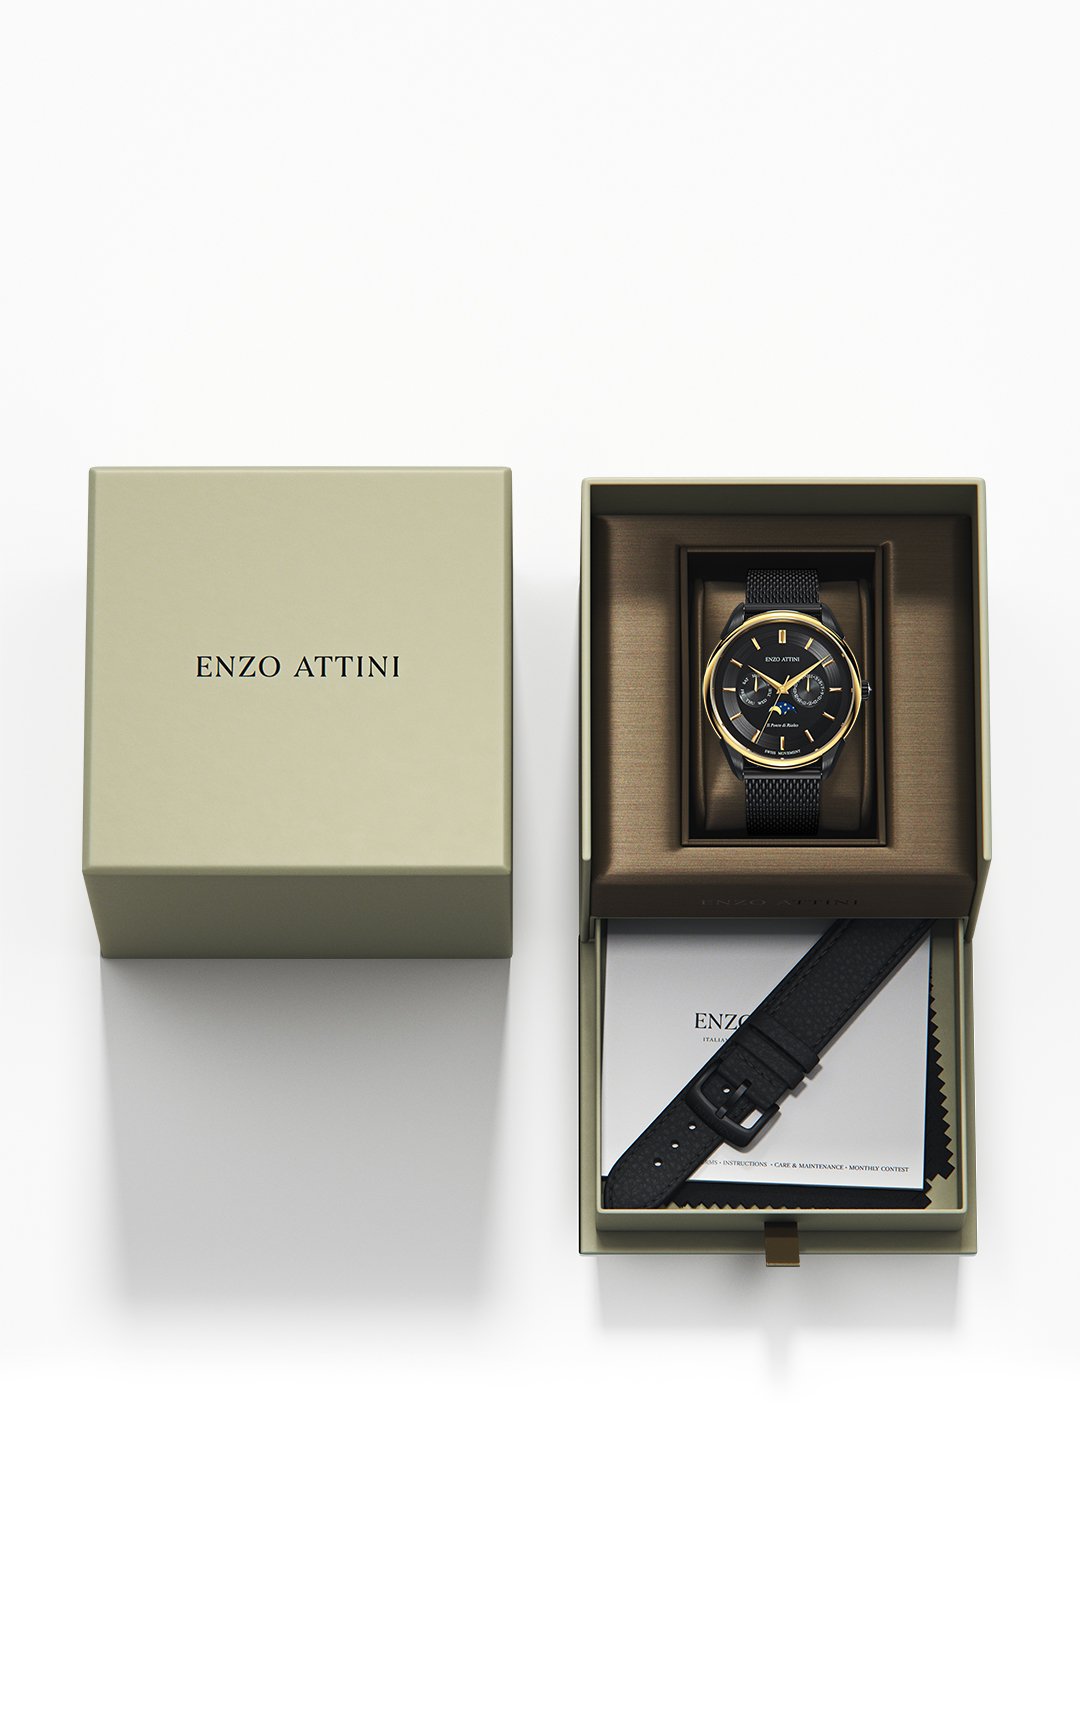 At Enzo Attini, the timeless Italian design meets the Swiss experience ...